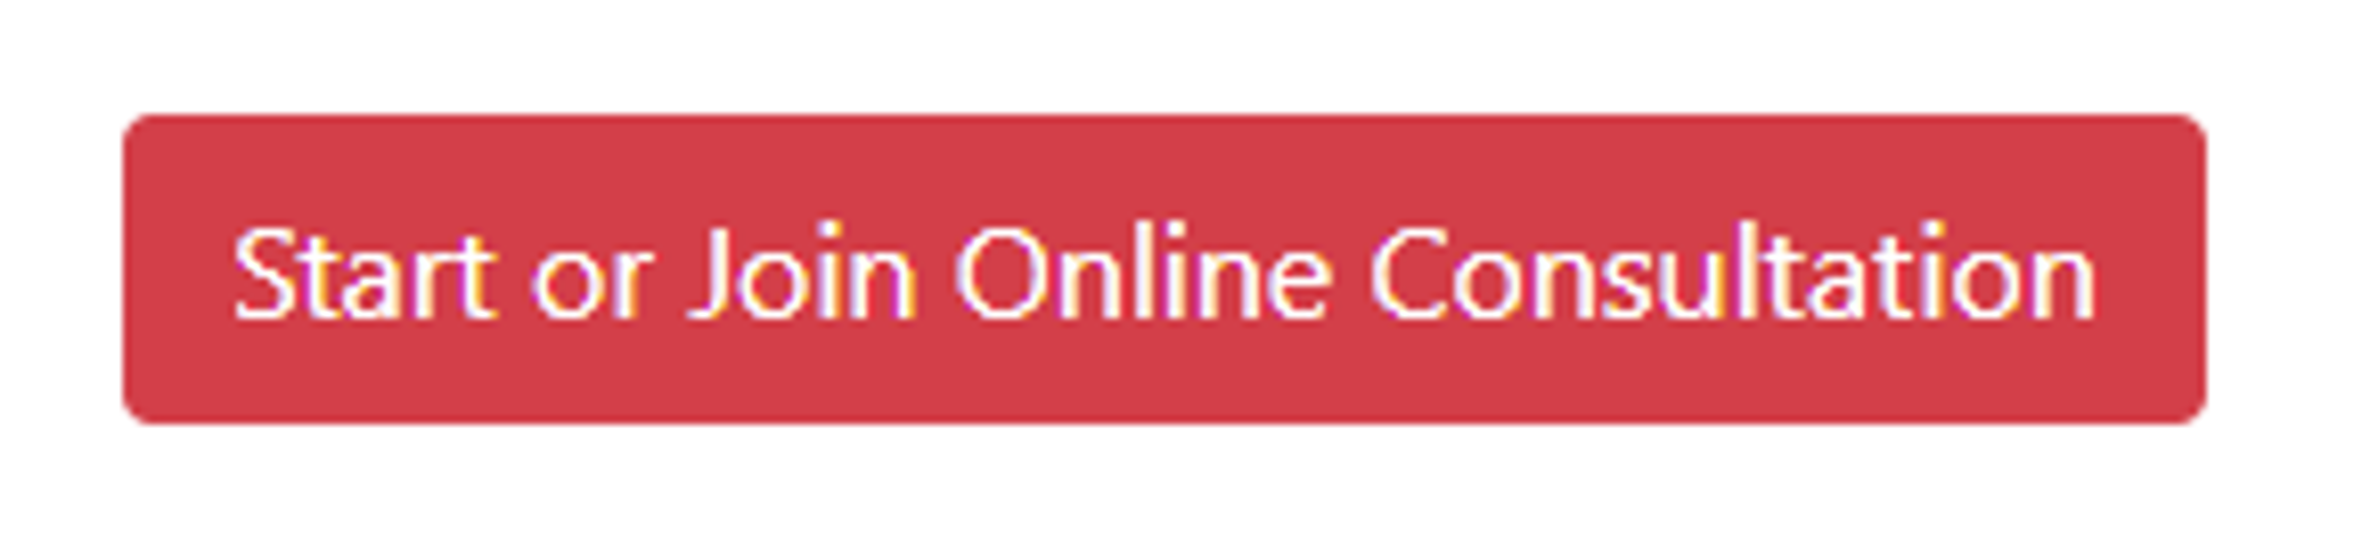 Screenshot of red "Start or Join Online Consultation" button